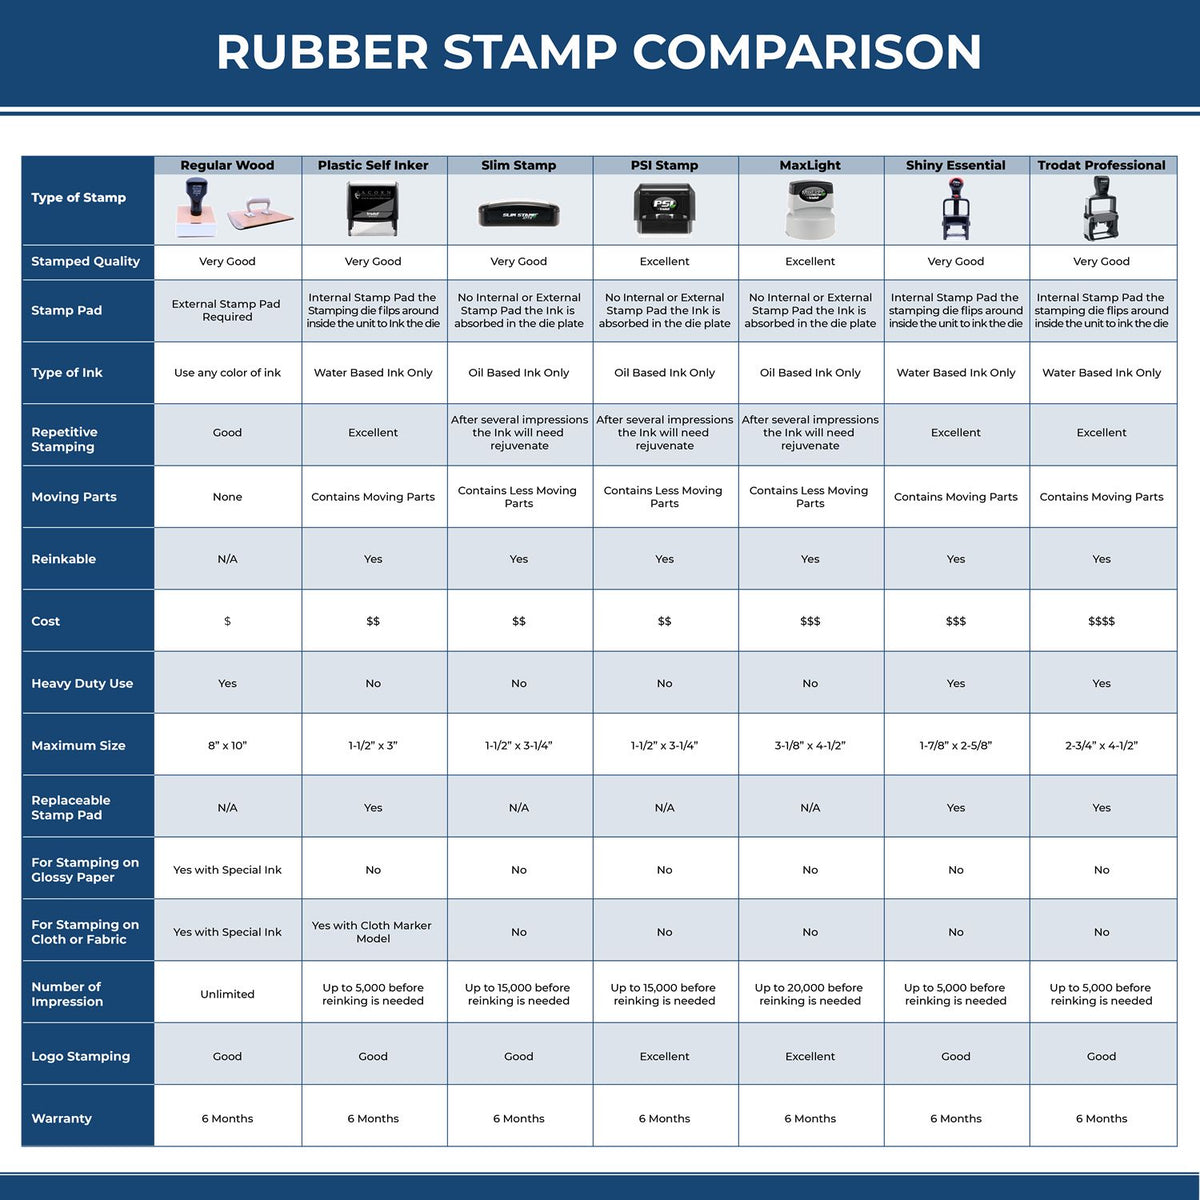 A comparison chart for the different types of mount models available for the Illinois Professional Engineer Seal Stamp.